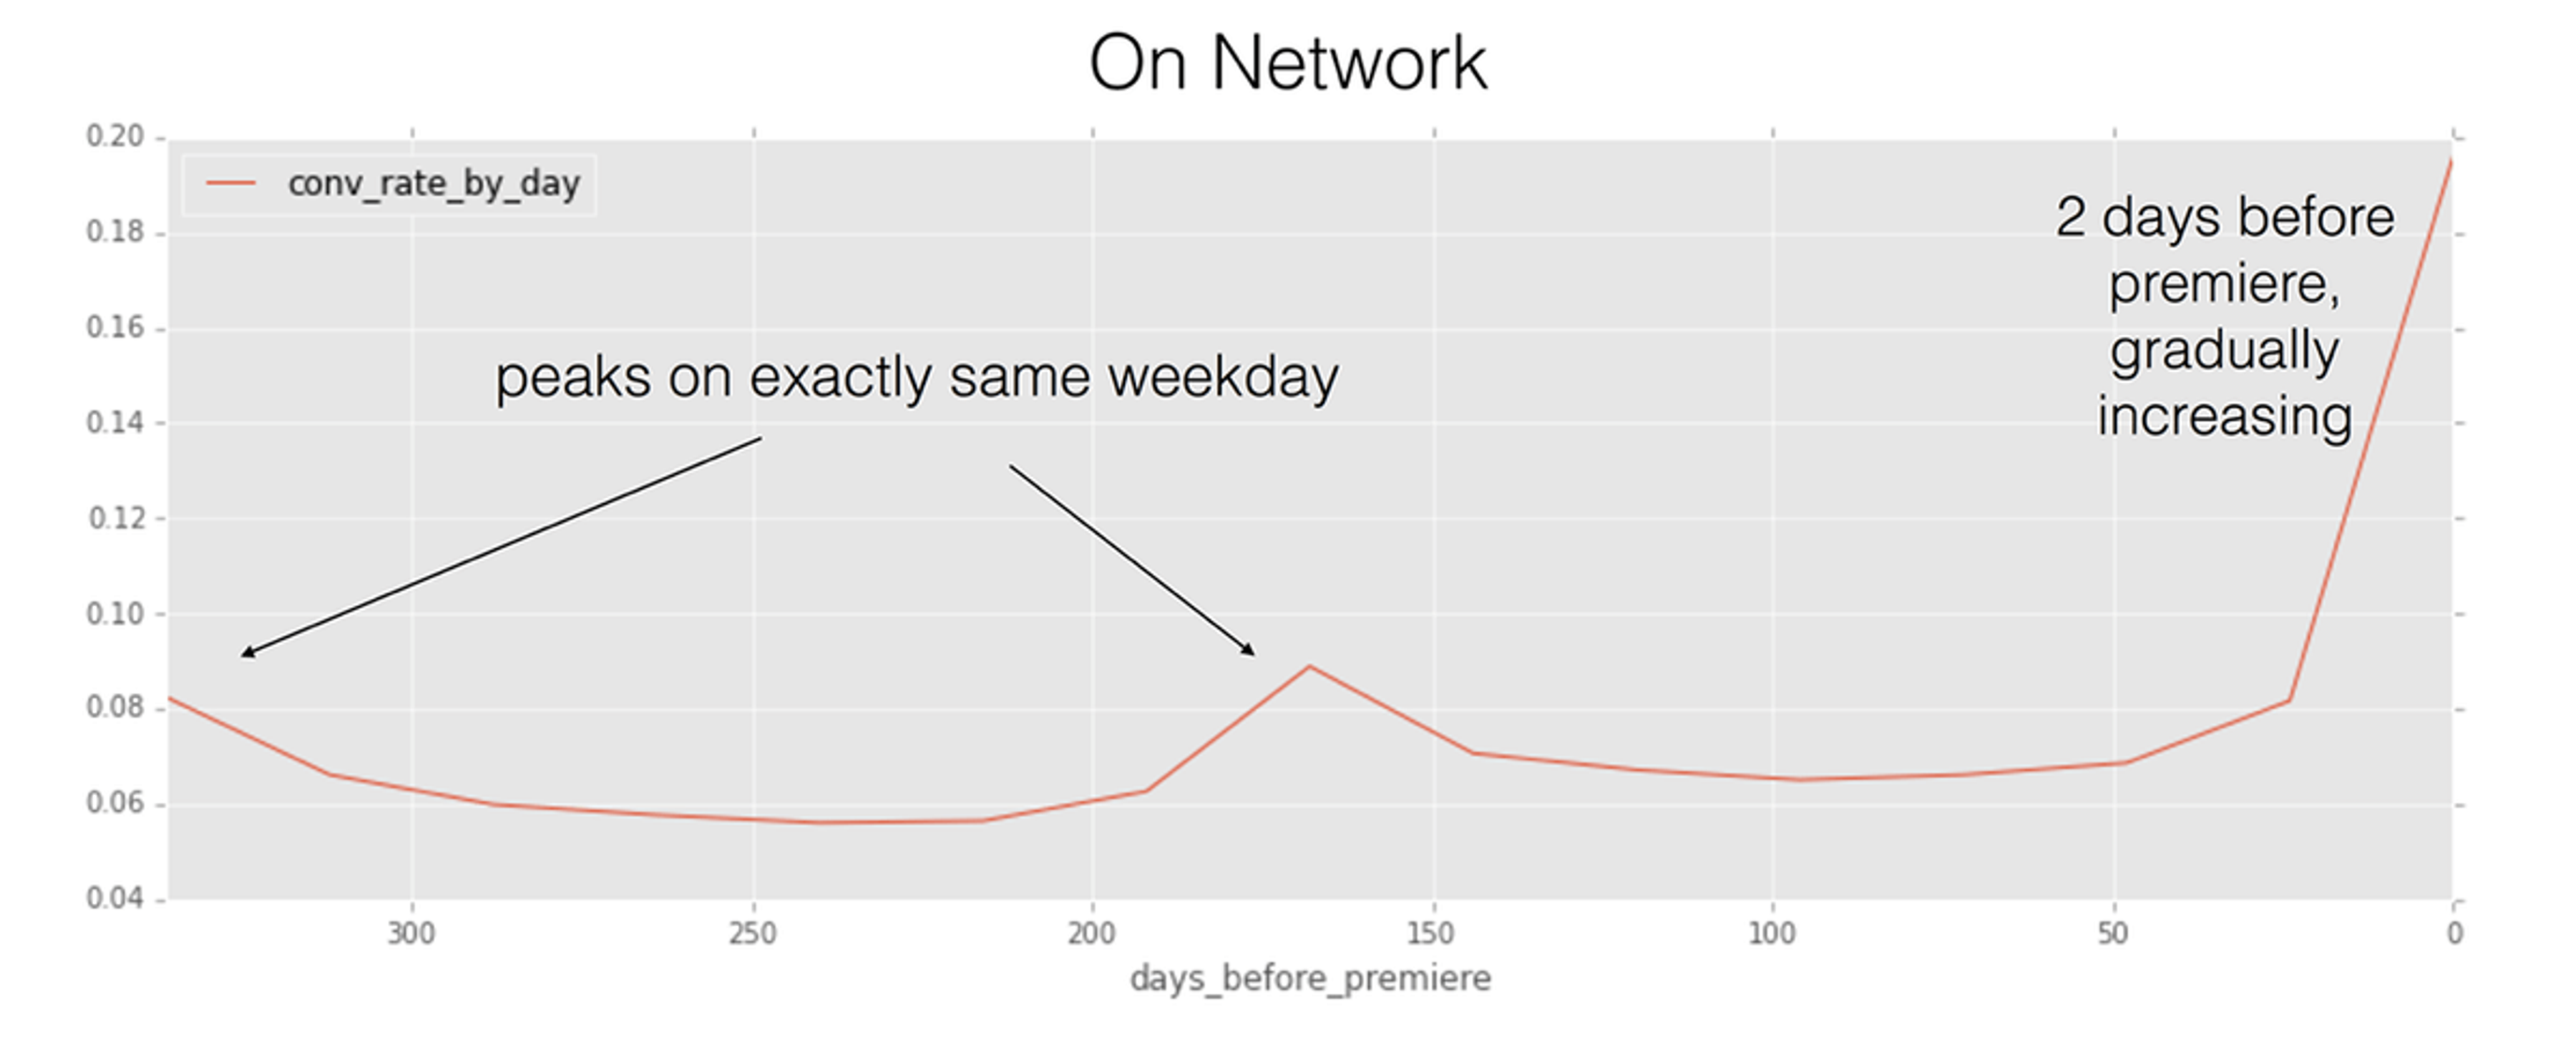 Line chart showing the conversion rate by day of week that tries to answer question about what days are the best to run TV advertising.